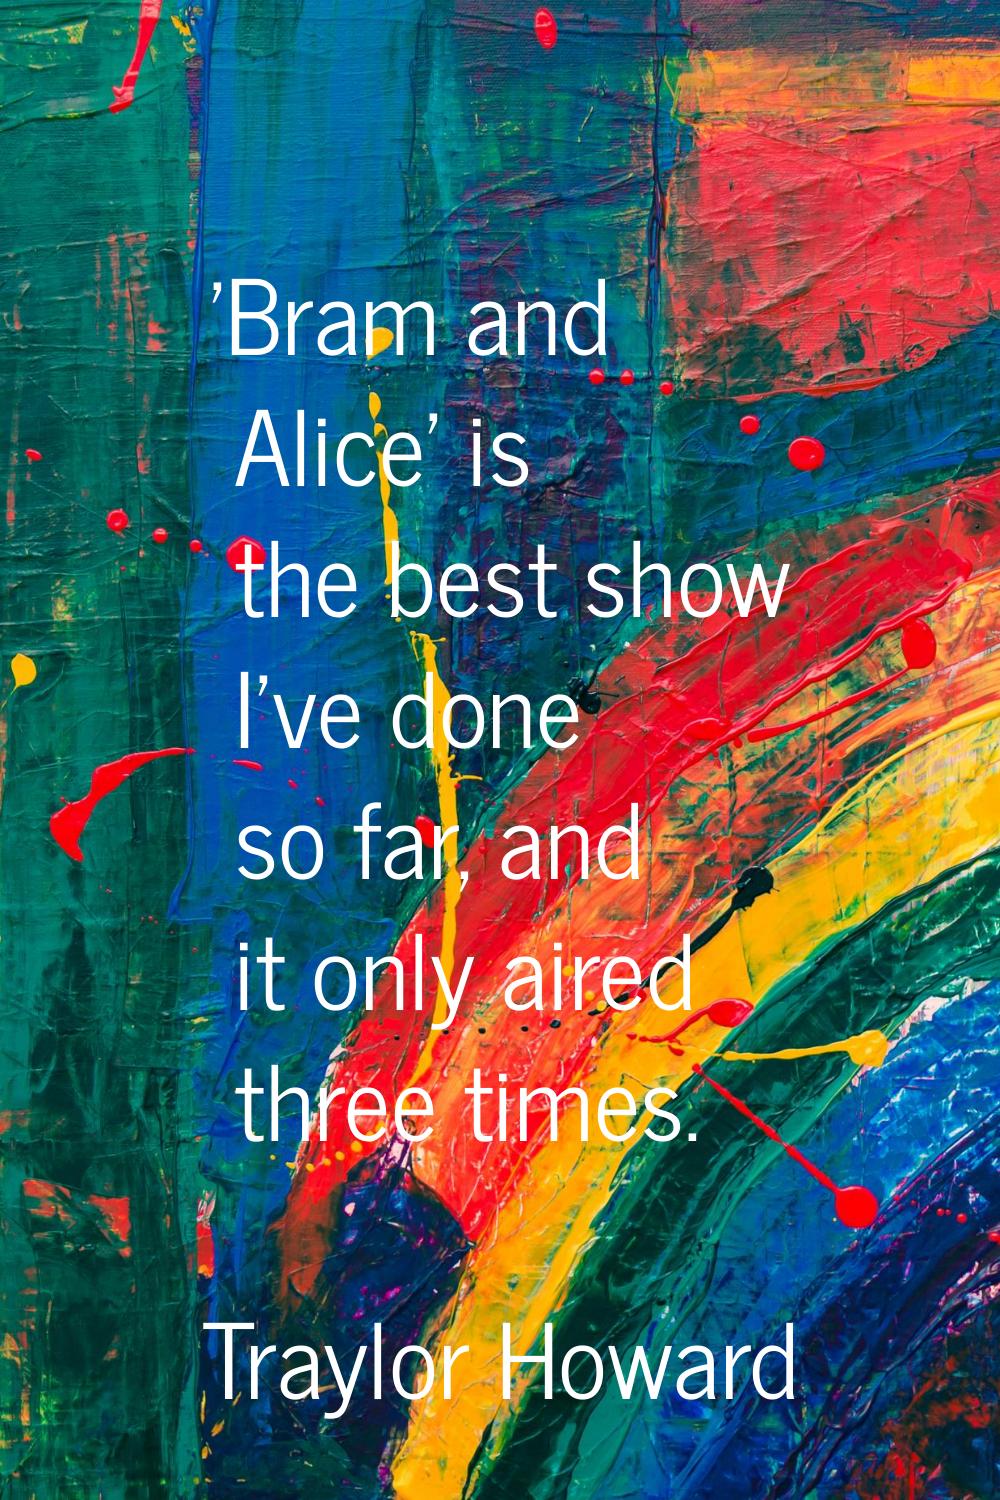 'Bram and Alice' is the best show I've done so far, and it only aired three times.